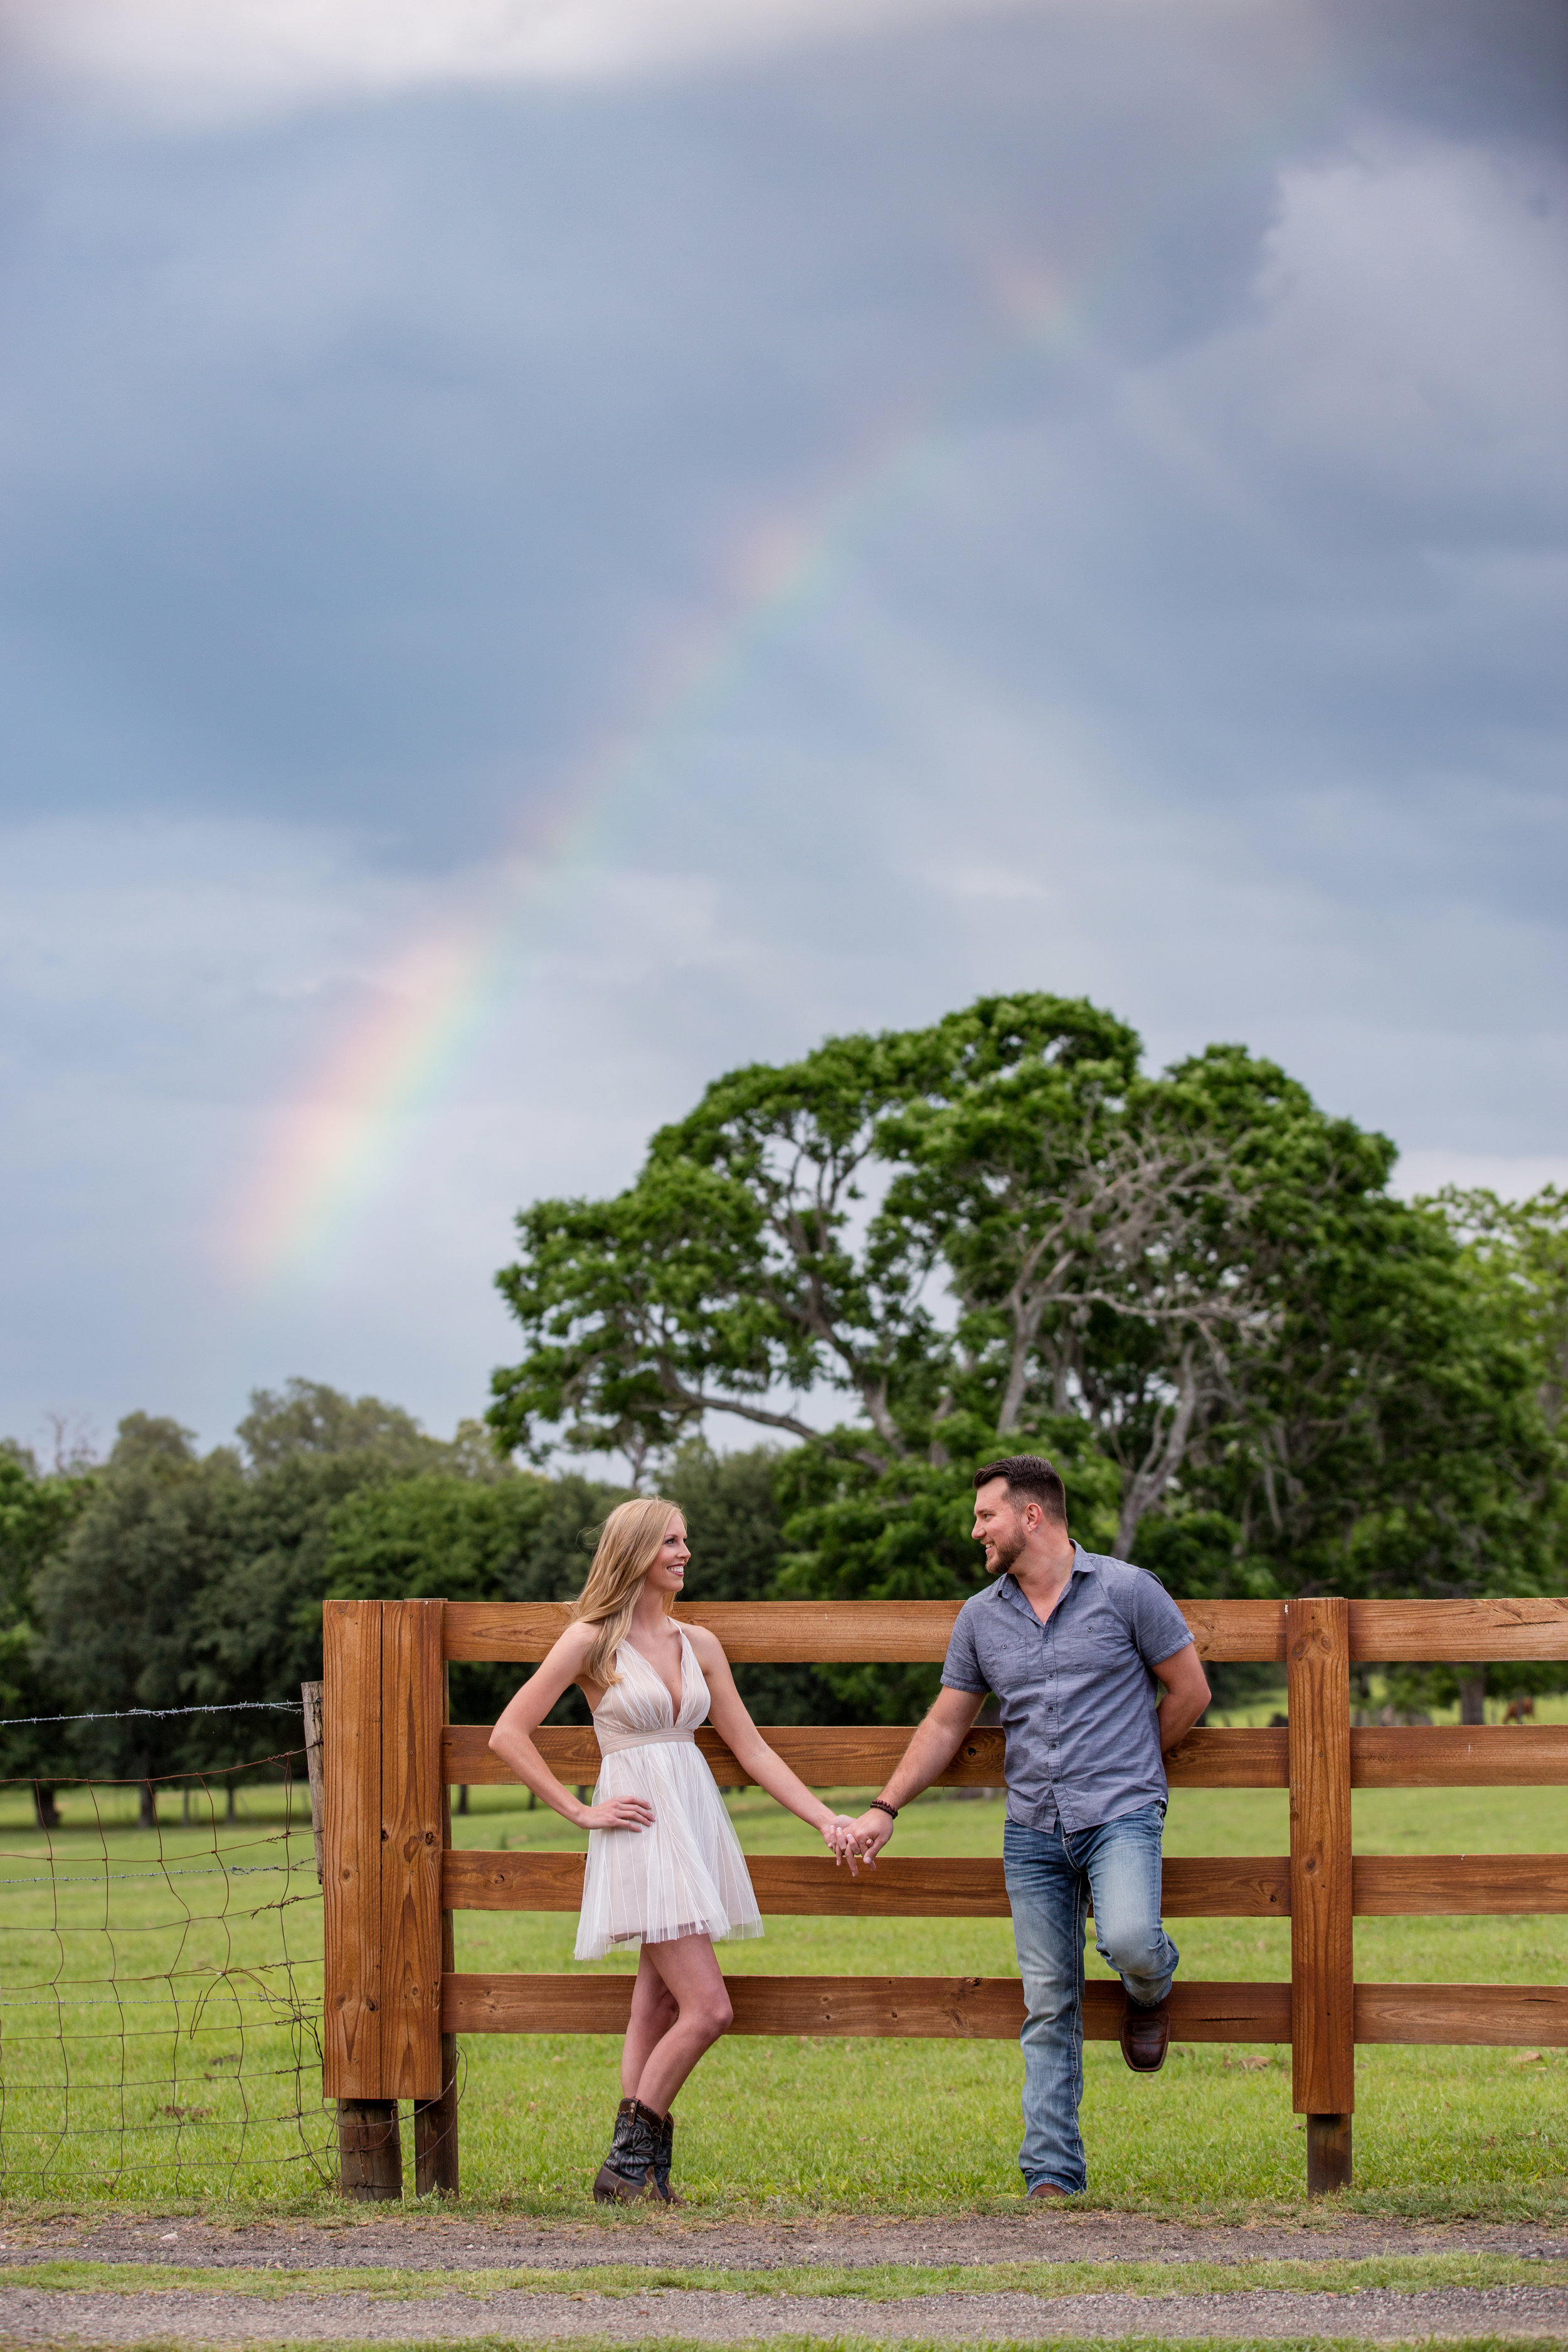 Gainesville Outdoor Engagement Photography Field Farm Photographer